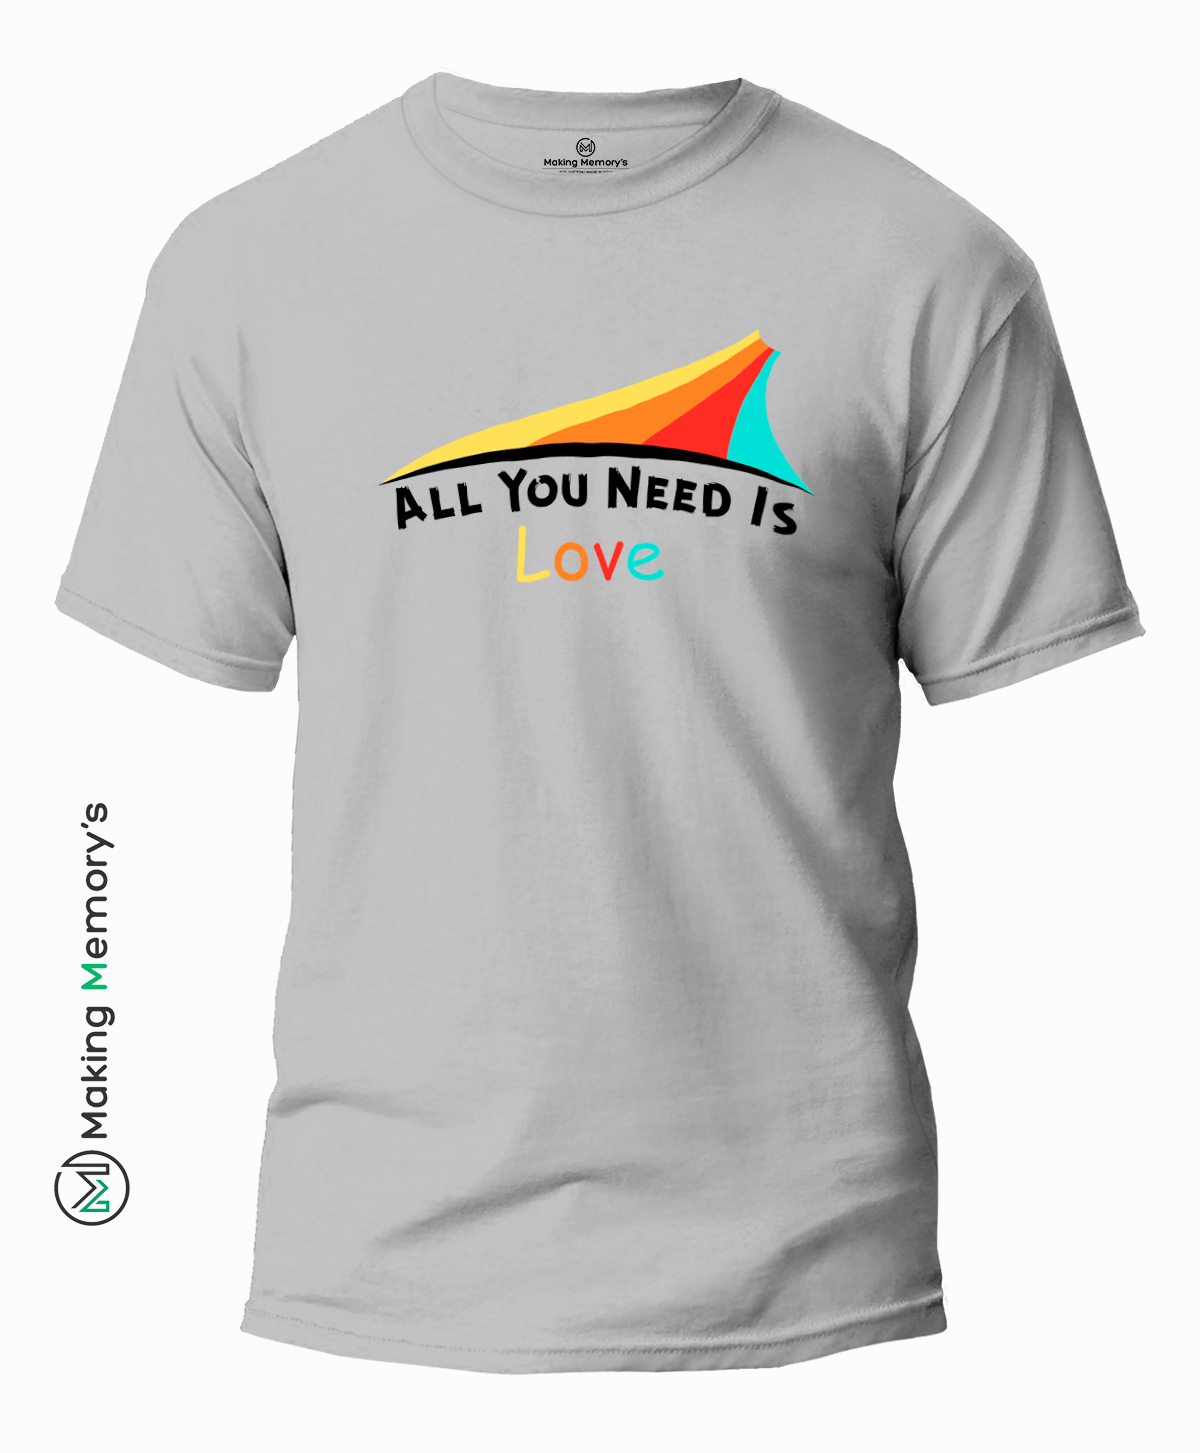 All-You-Need-Is-Love-Gray-T-Shirt